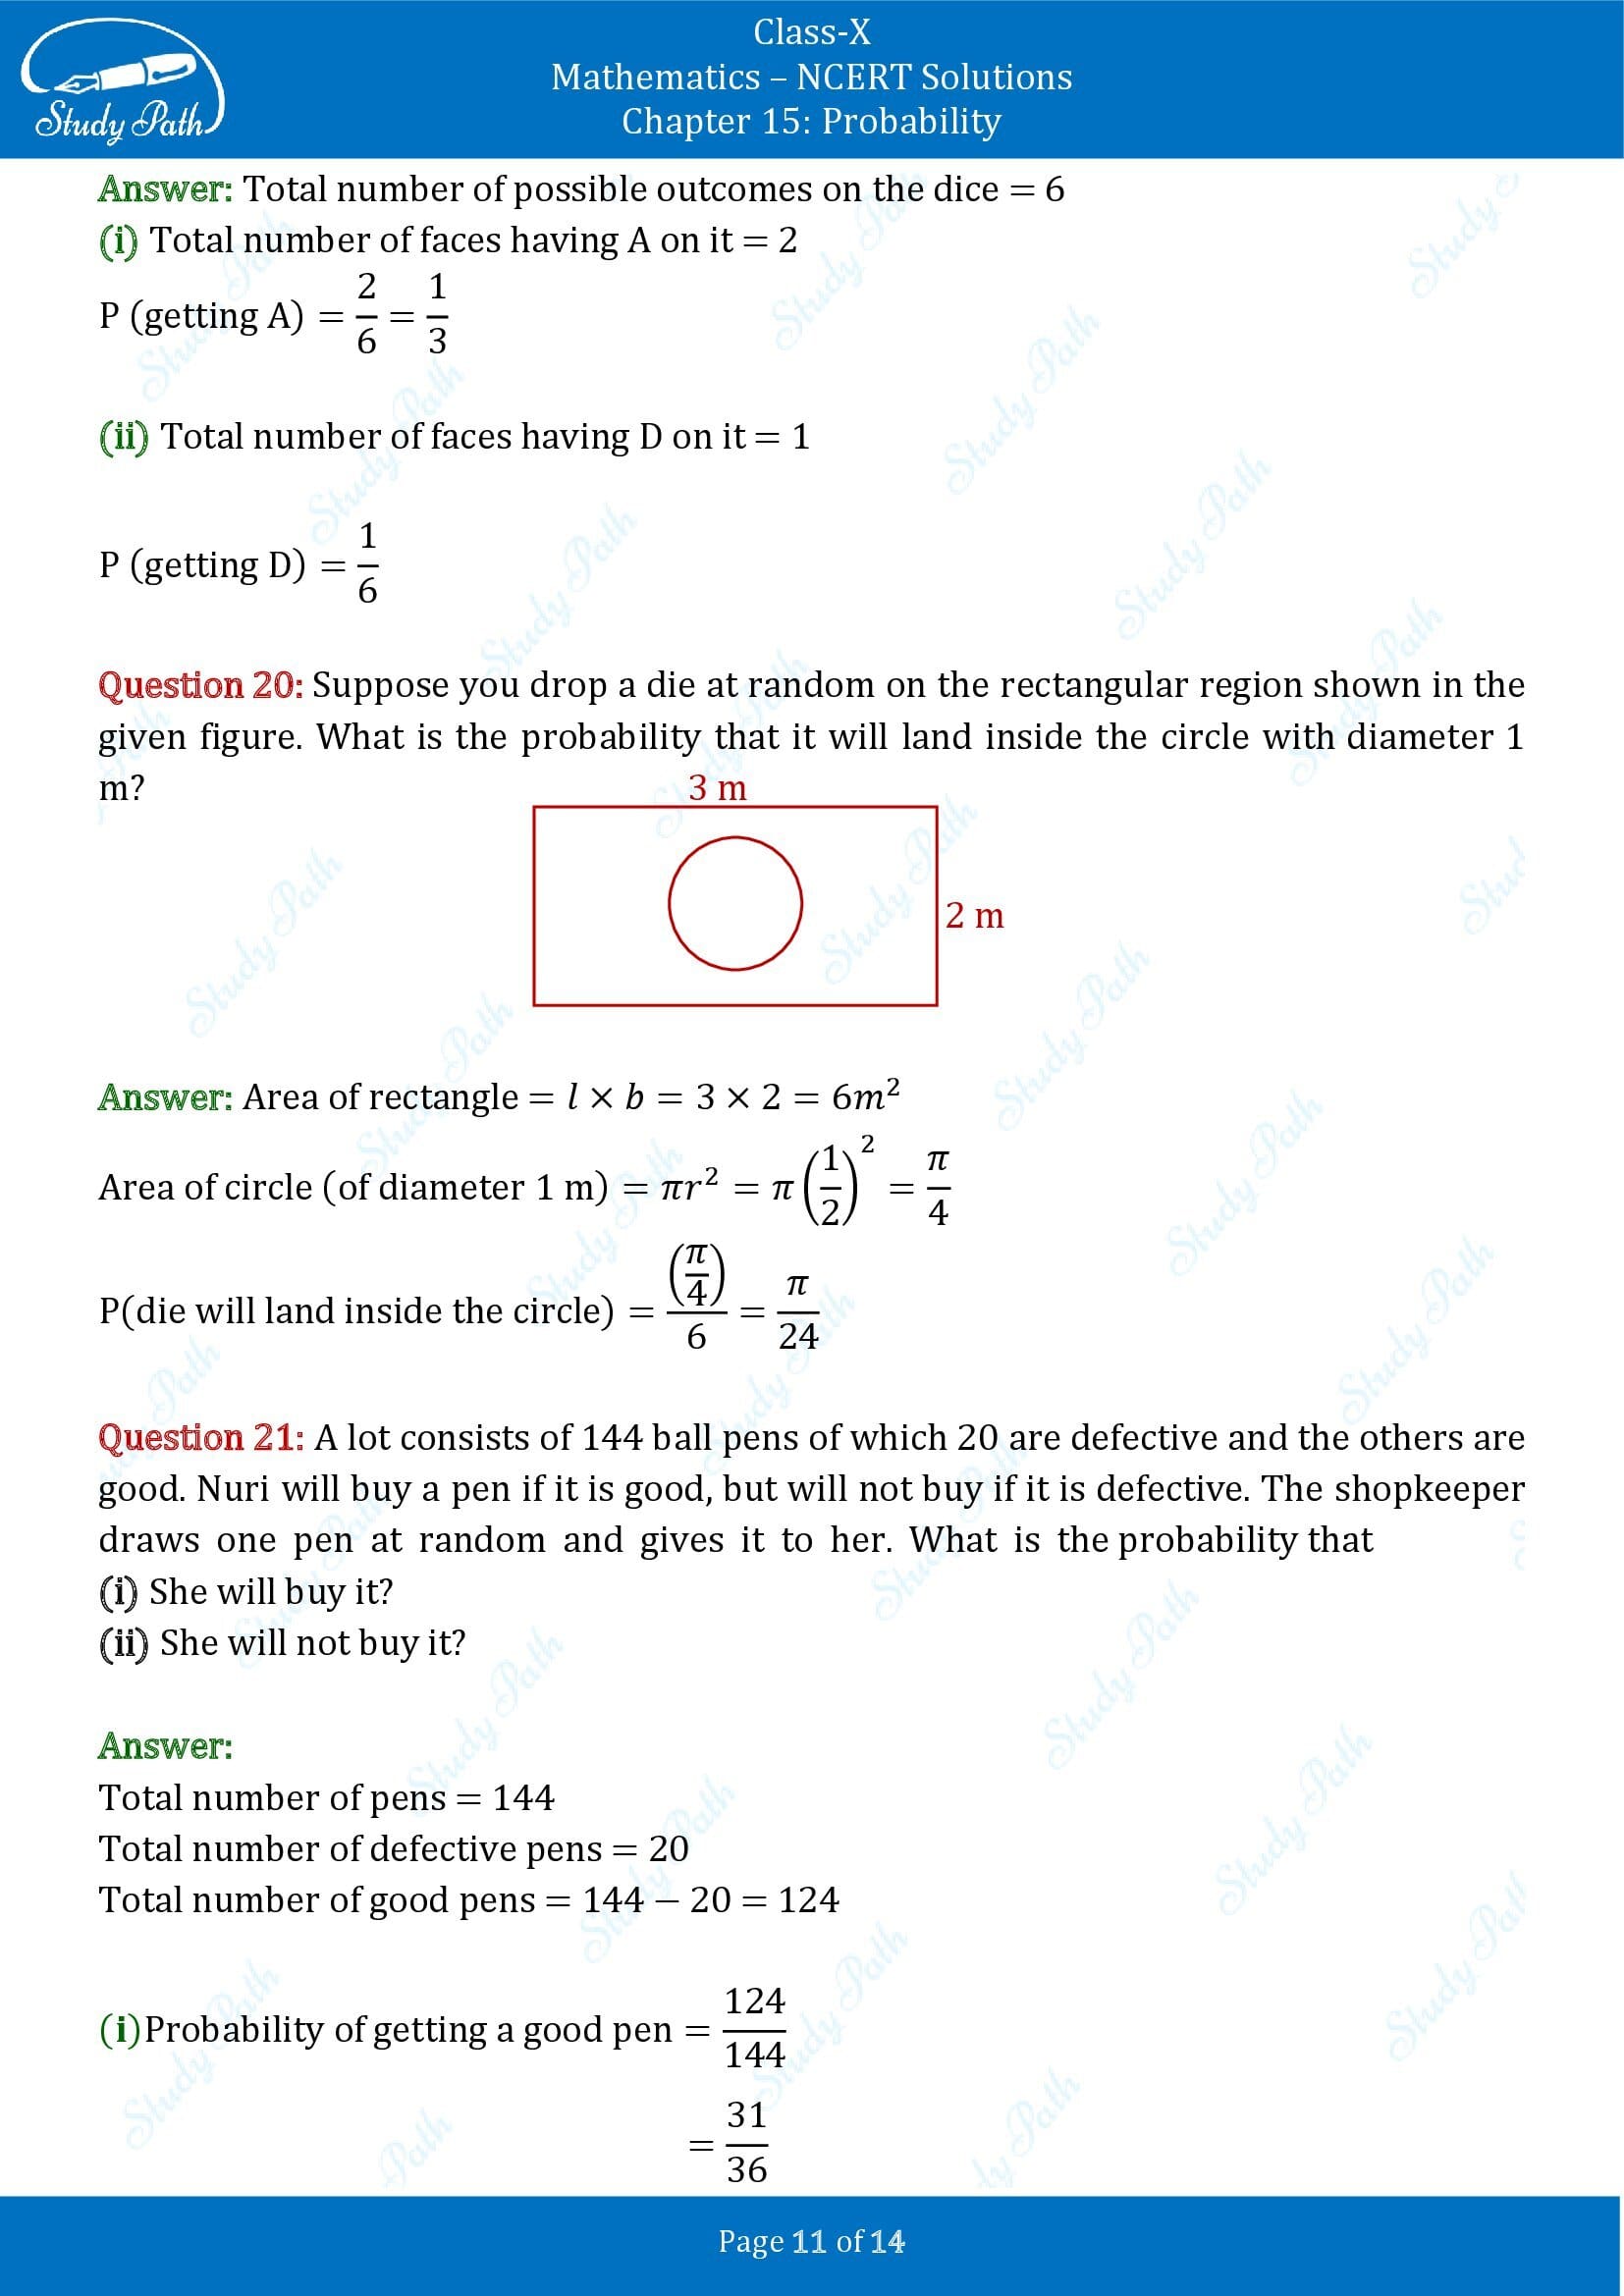 NCERT Solutions for Class 10 Maths Chapter 15 Probability Exercise 15.1 00011